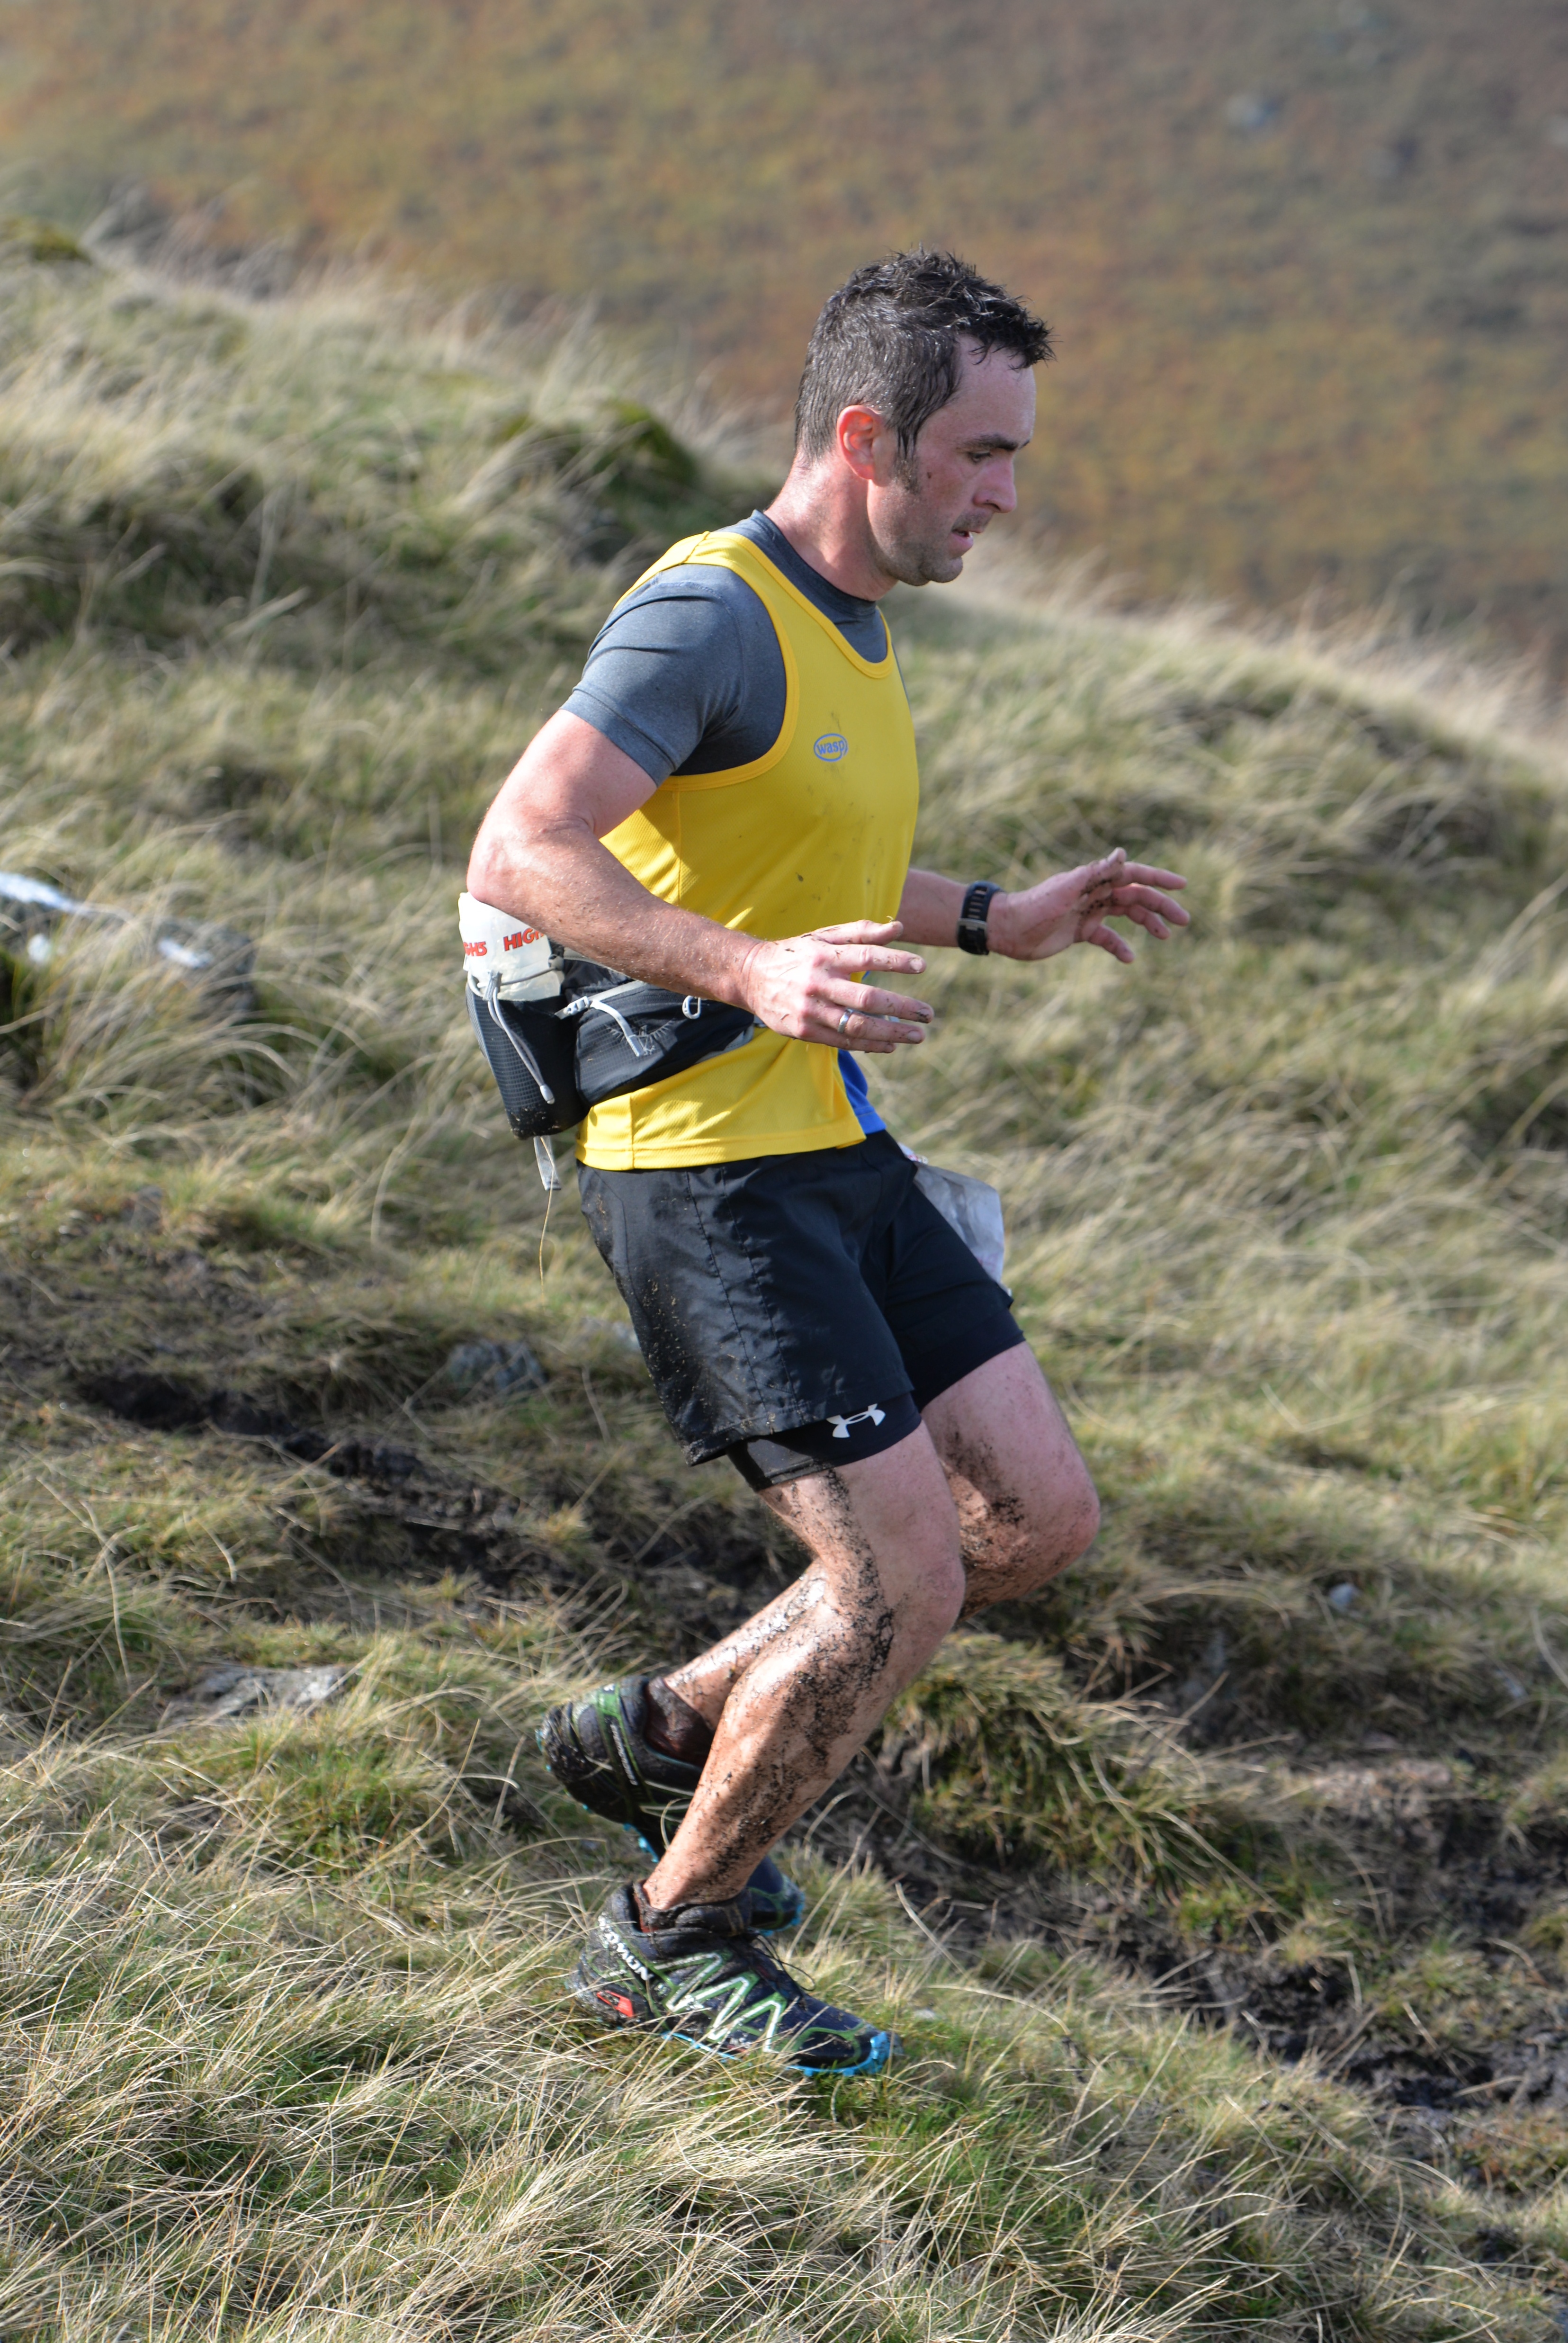 Damian Boyle was in action at the Purbeck 16